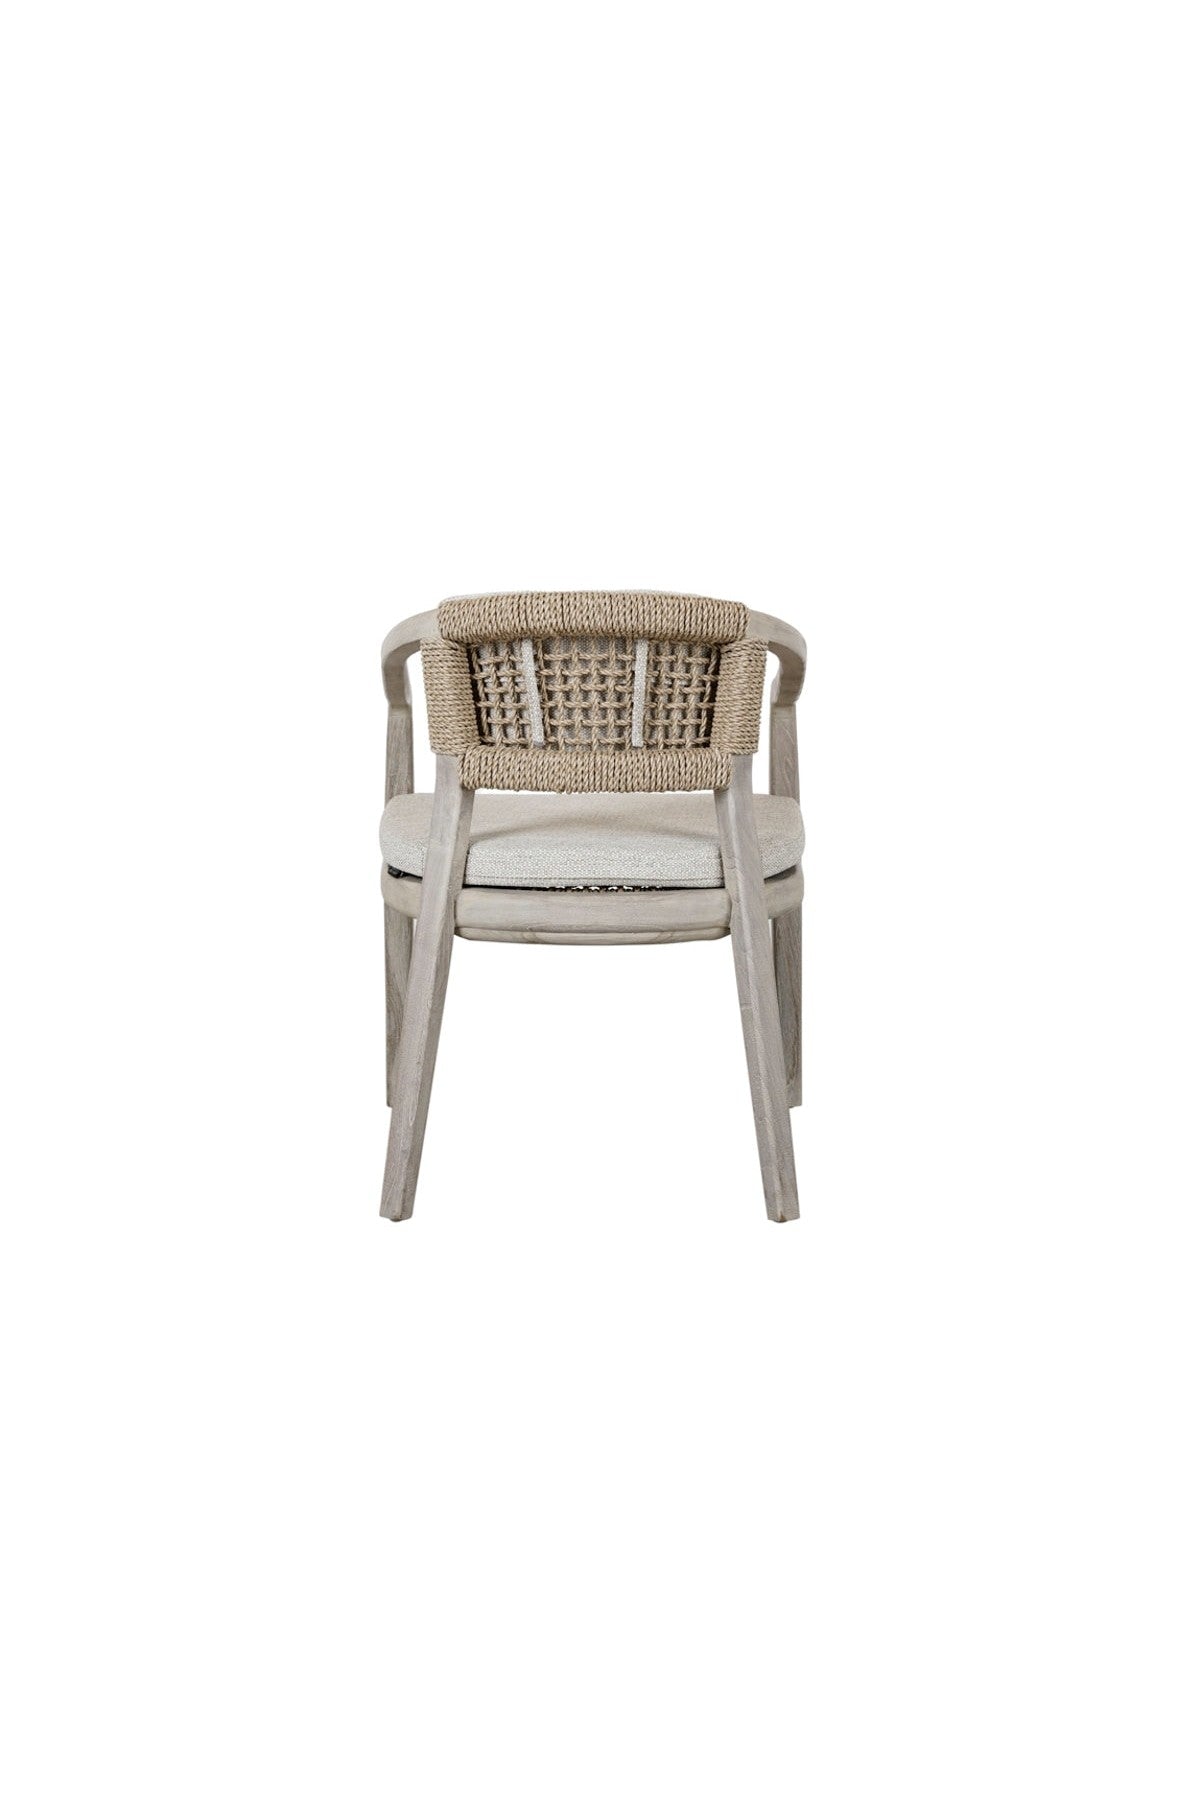 Hanson Outdoor Dining Chair - 2 Colors